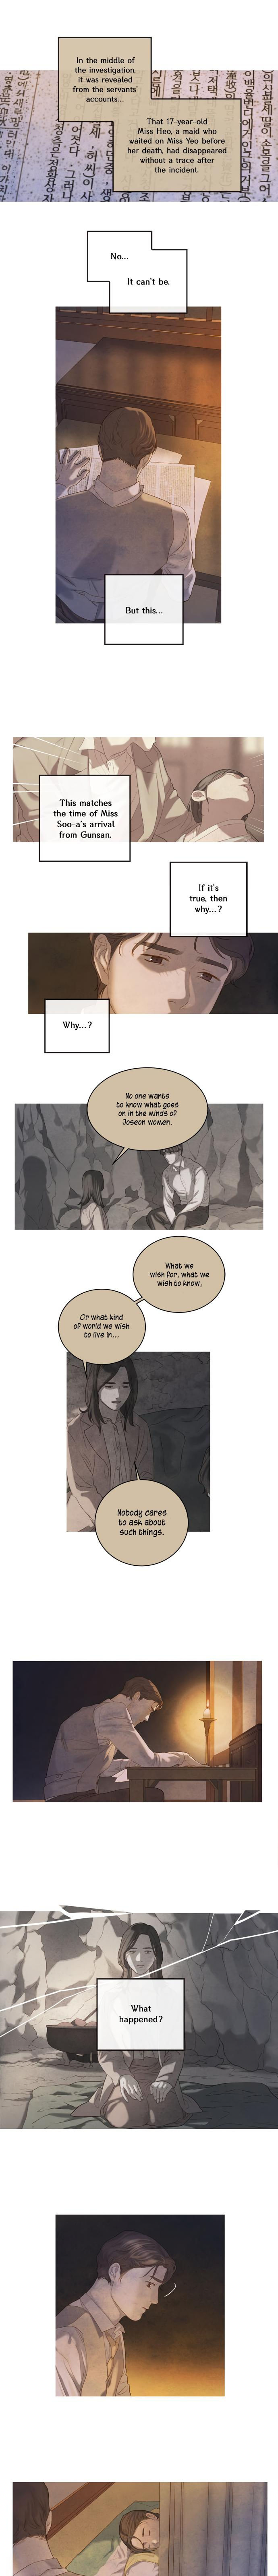 Gorae Byul - The Gyeongseong Mermaid - Chapter 36 Page 2